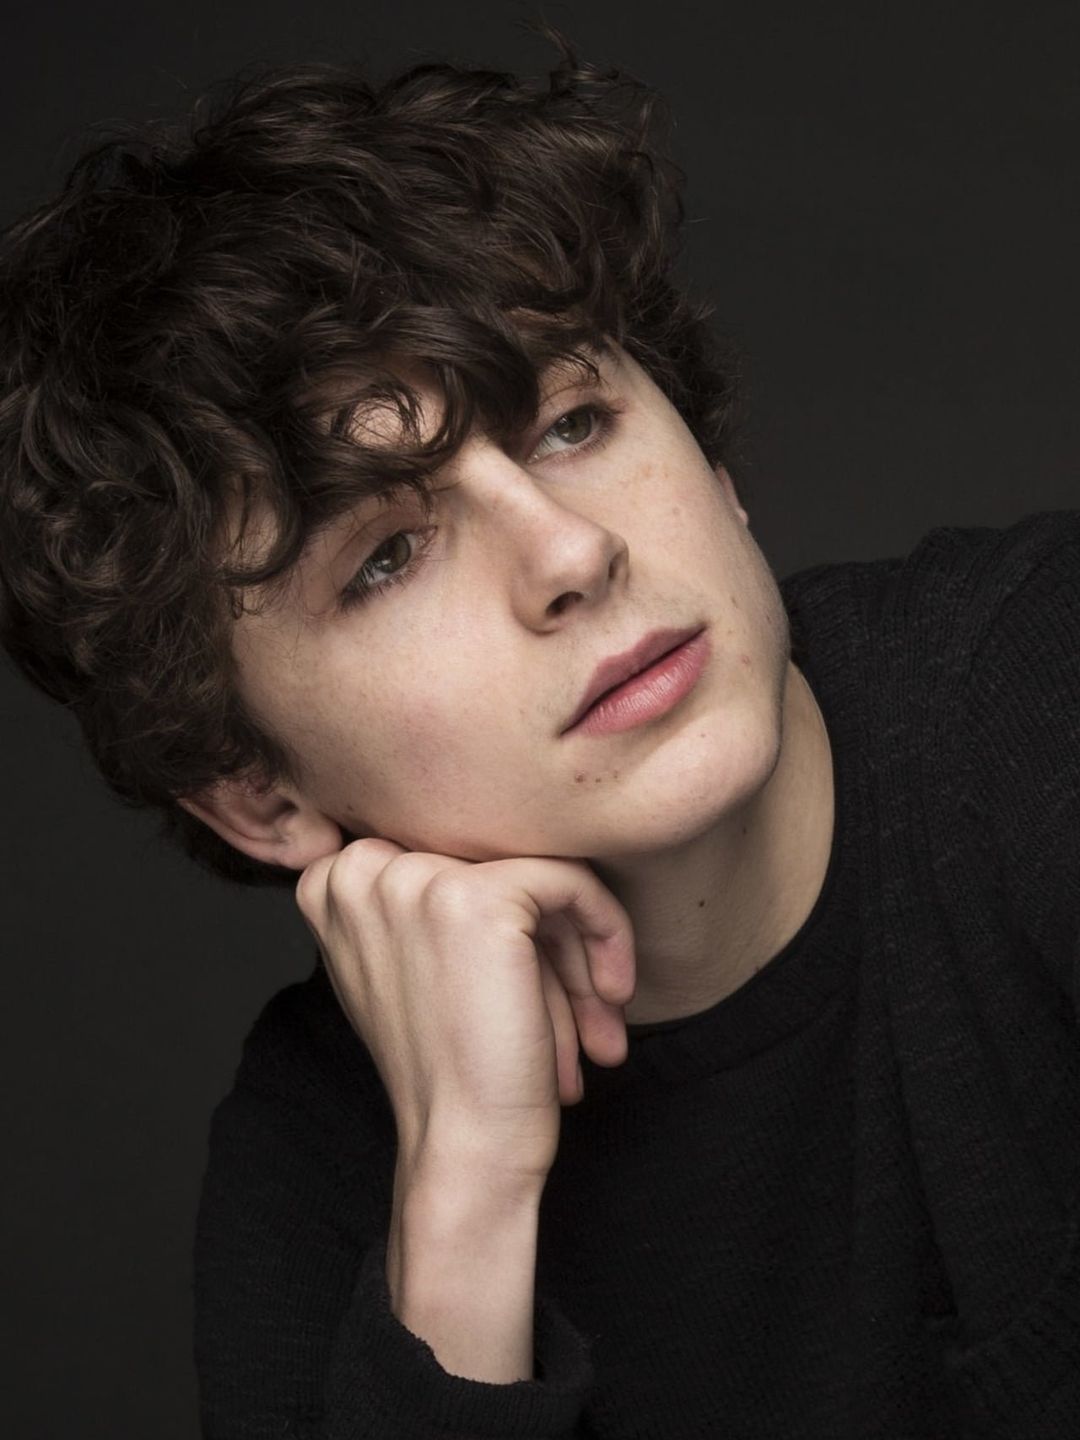 Timothee Chalamet young pics